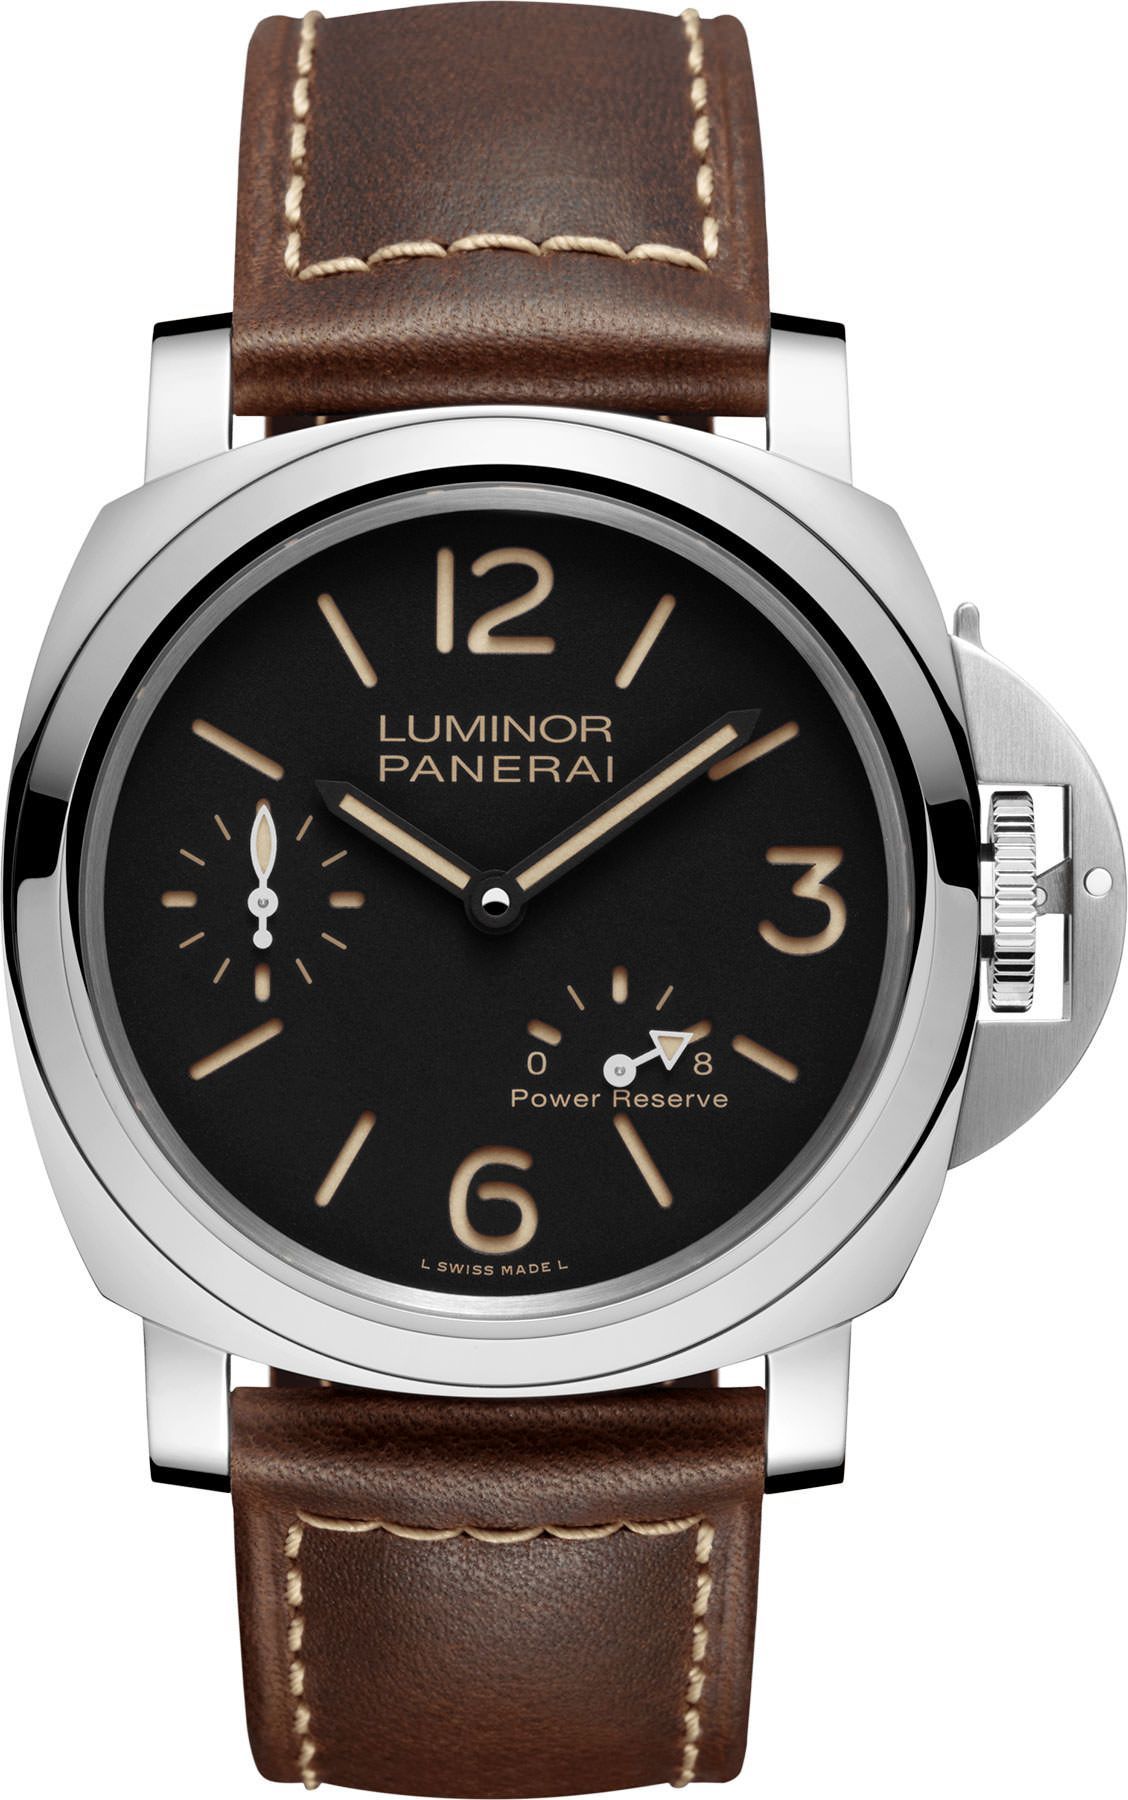 Panerai Luminor 8 Days Power Reserve Black Dial 44 mm Automatic Watch For Men - 1